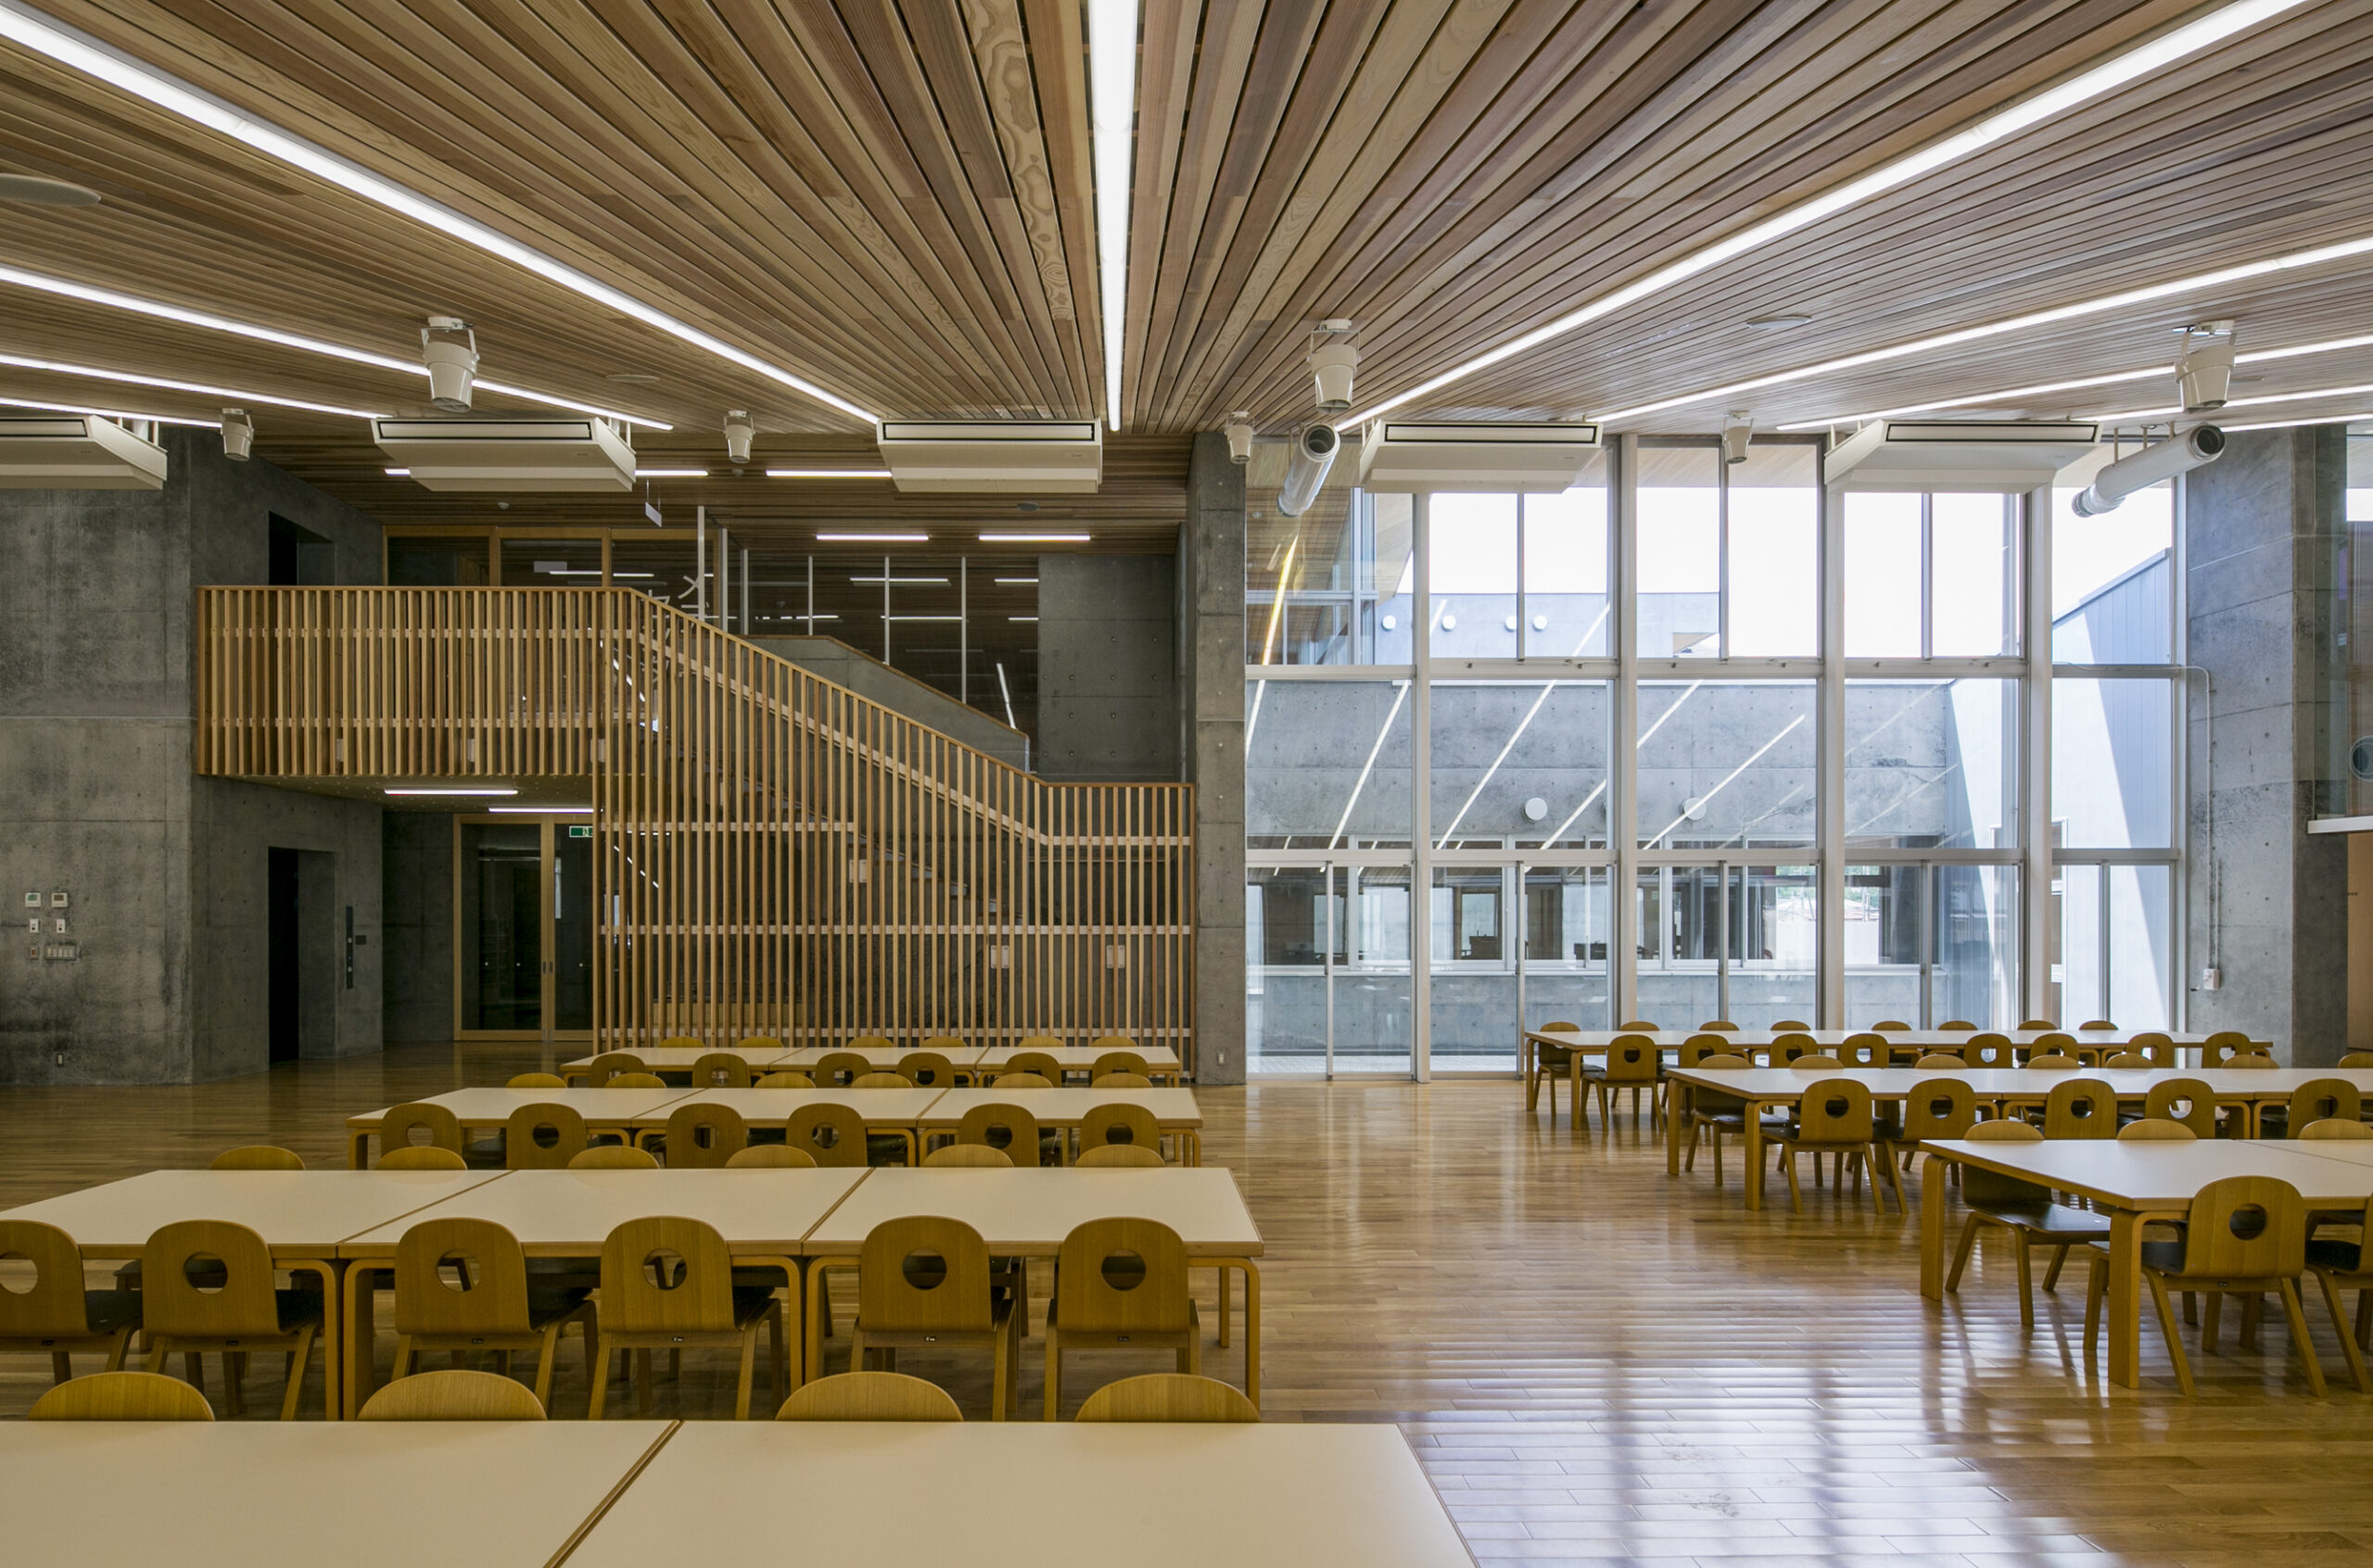 A two-storey common area of the school, seamlessly blending the natural warmth of wooden ceilings and floors with the sleek and modern aesthetic of concrete walls. 